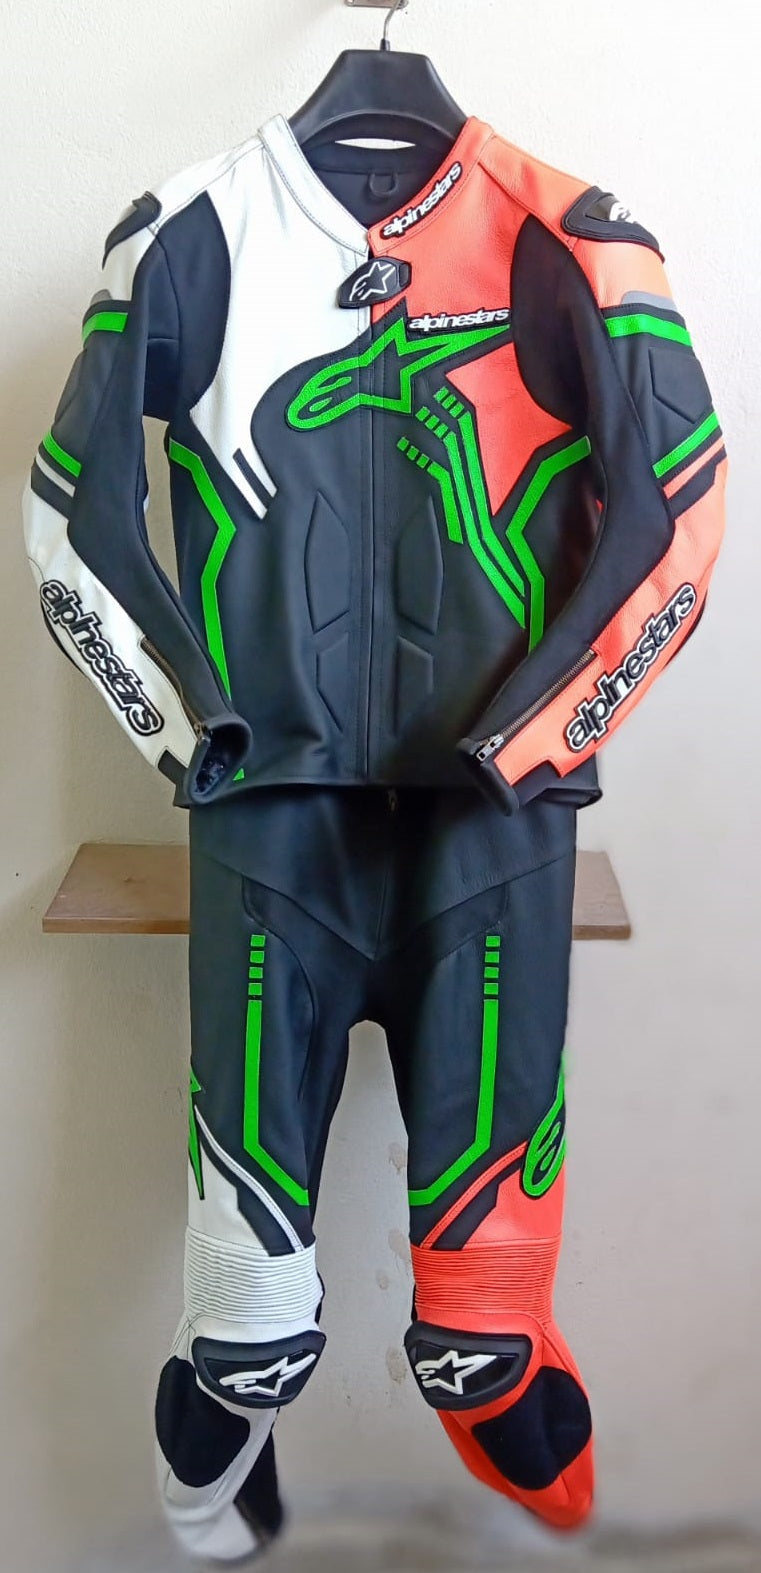 White Fluorescent Orange UG-0130 Custom Design 1 Piece 2 Piece Perforated Motorcycle Leather Racing Suit Front